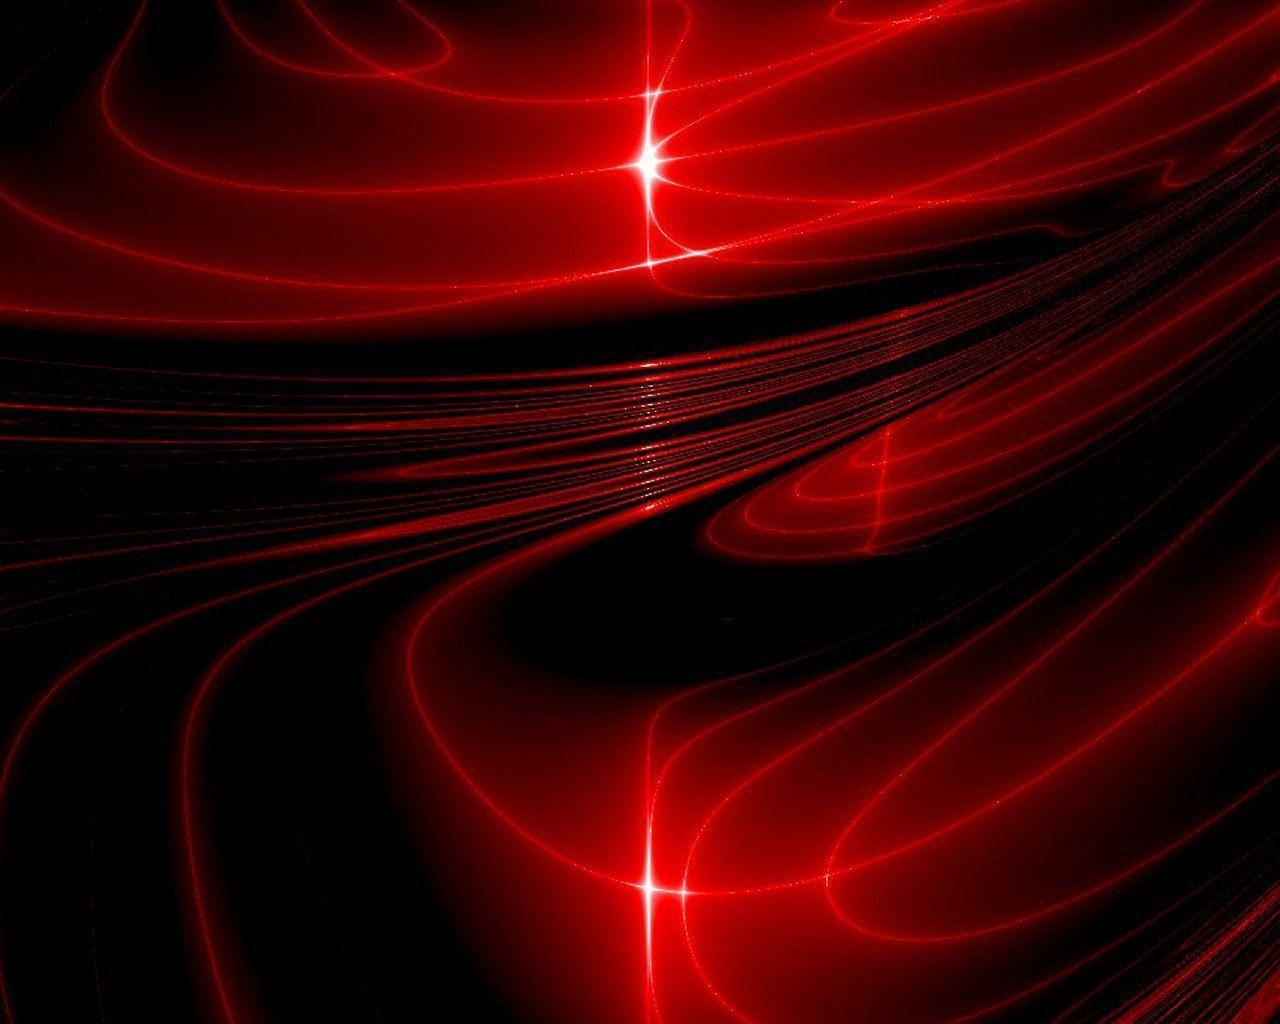 Wallpaper For > Red And Black Wallpaper Border